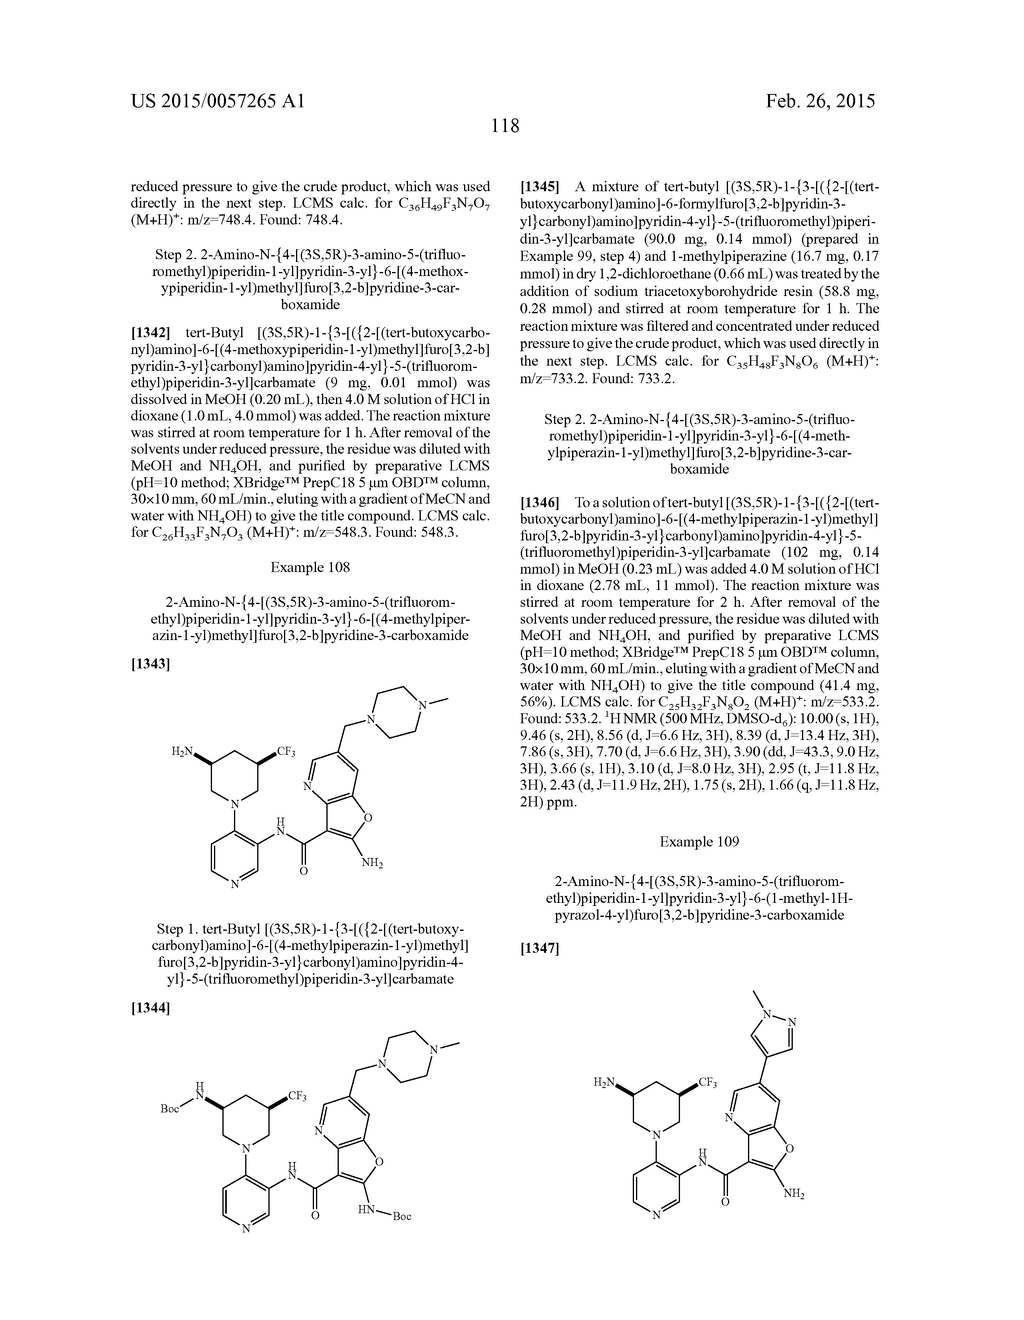 FURO- AND THIENO-PYRIDINE CARBOXAMIDE COMPOUNDS USEFUL AS PIM KINASE     INHIBITORS - diagram, schematic, and image 119